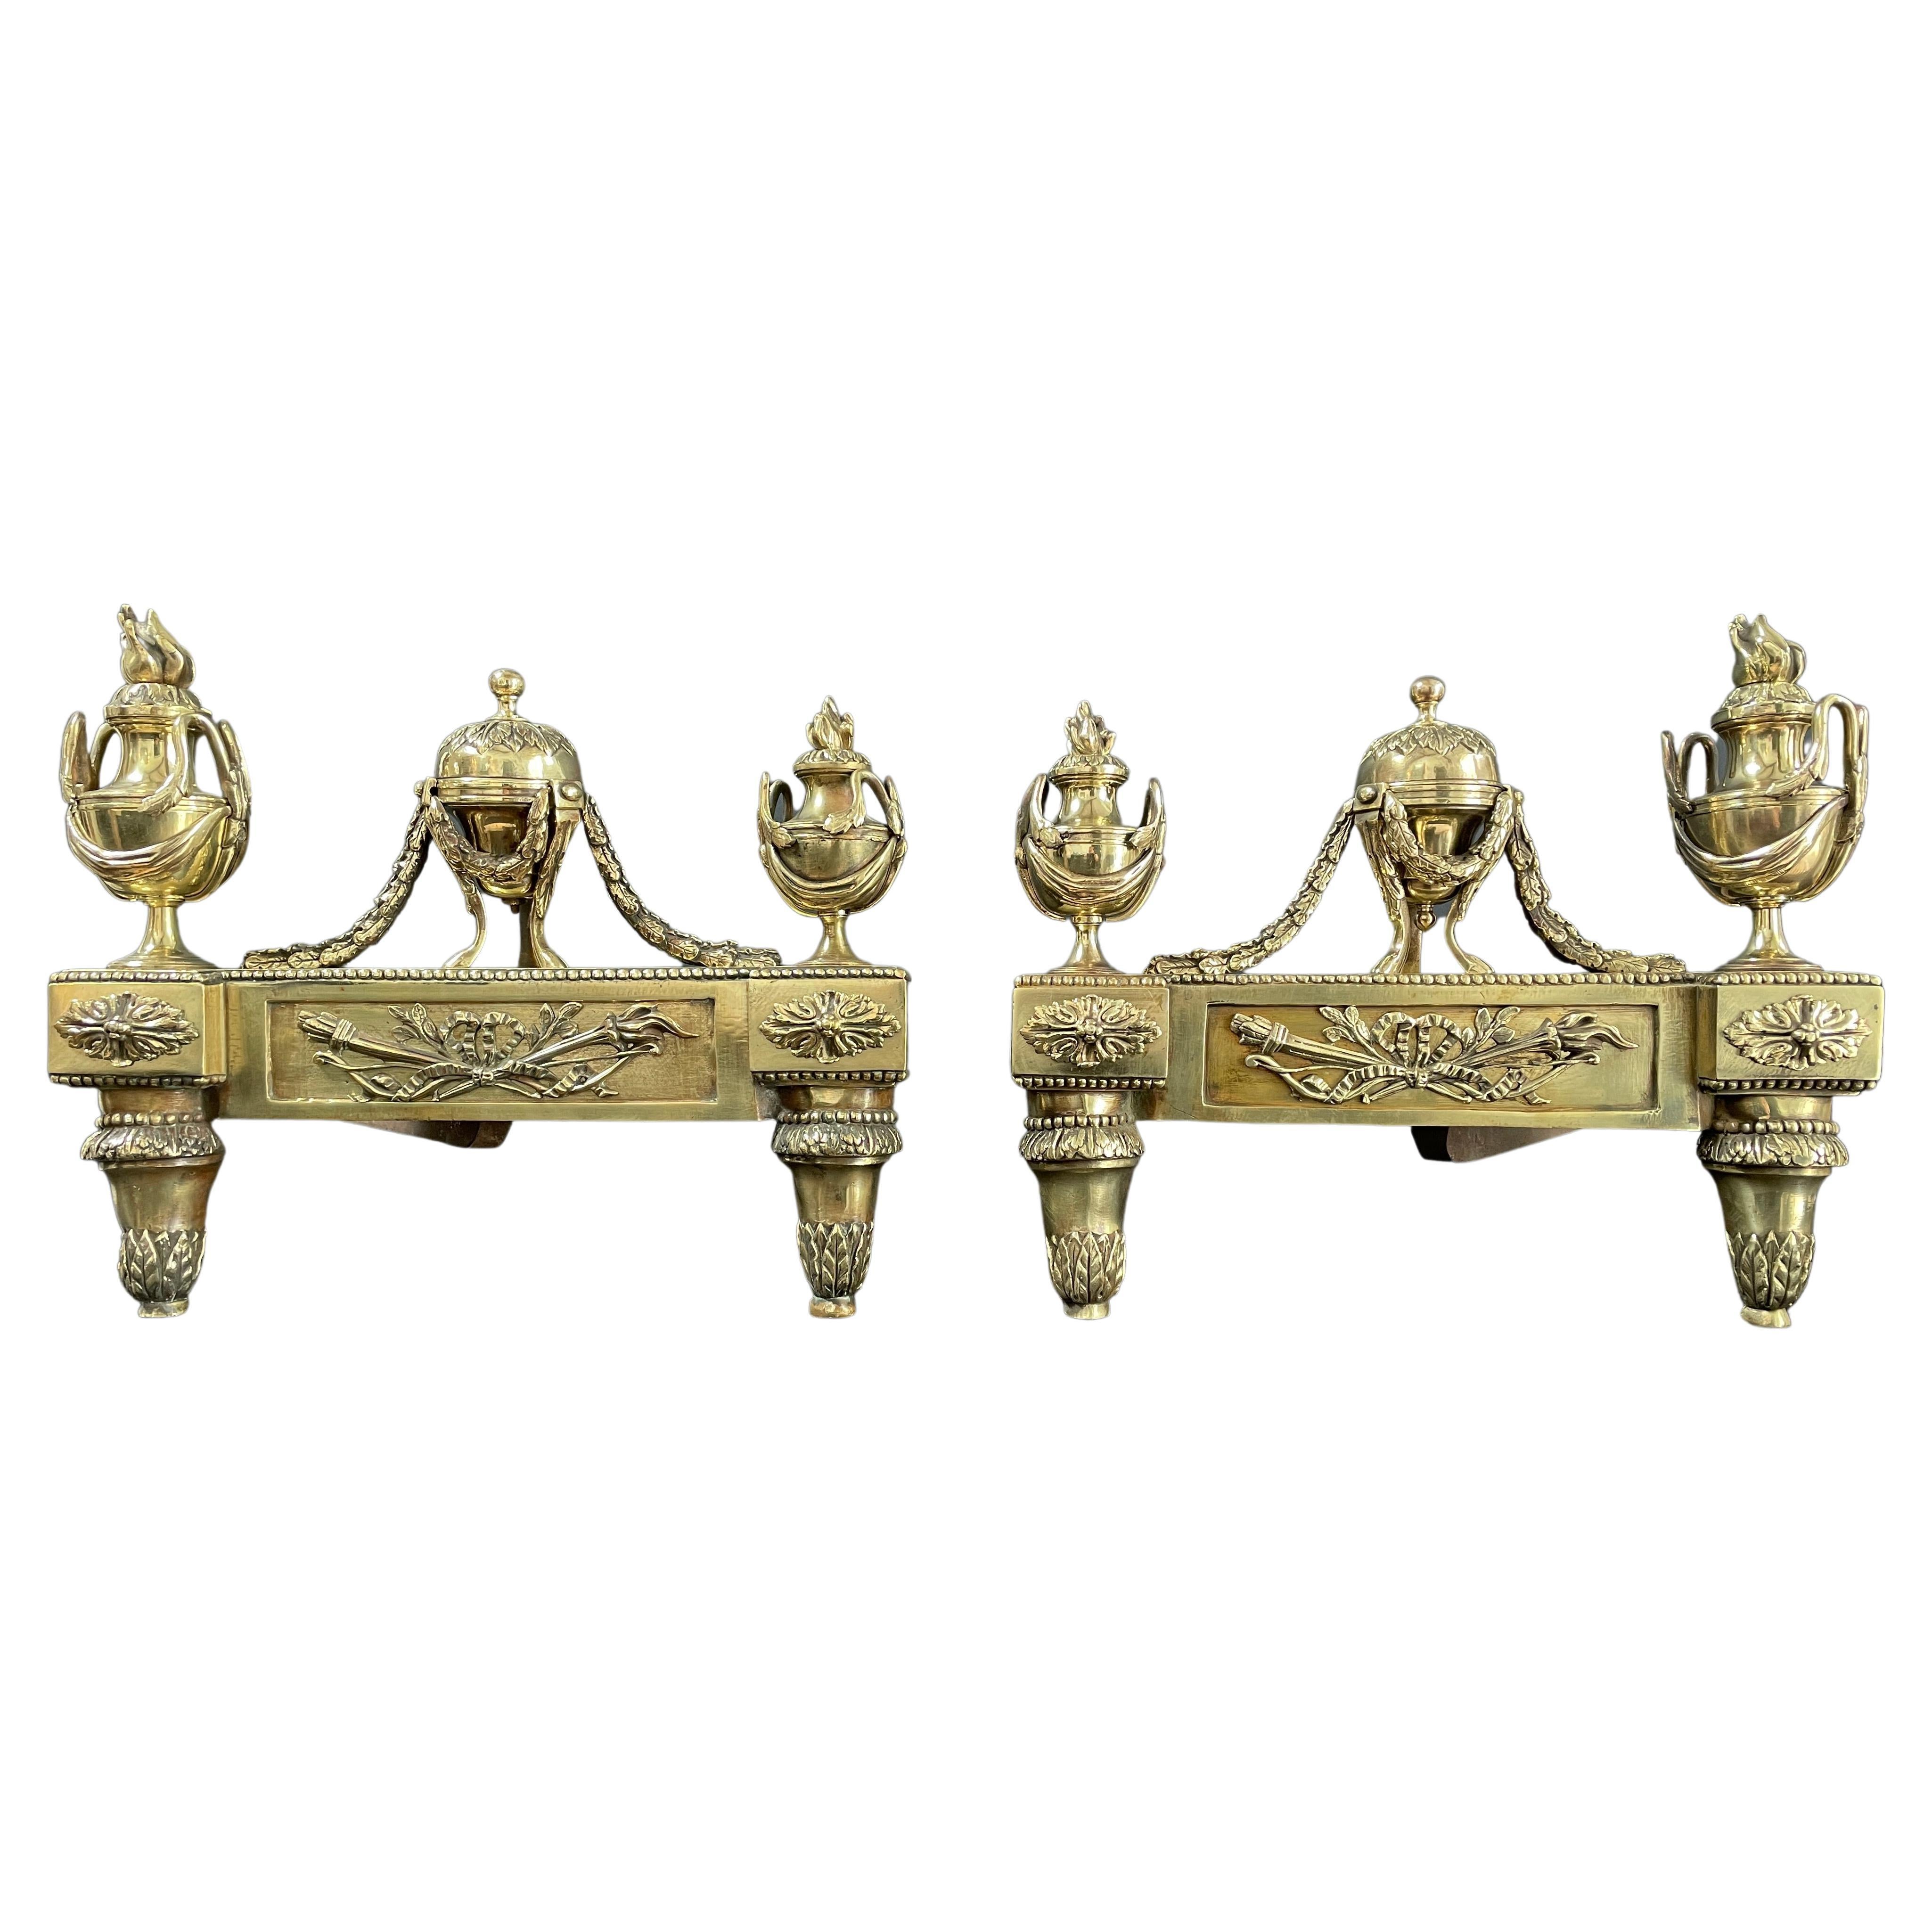 Set Antique French Andirons or Firedogs Brass